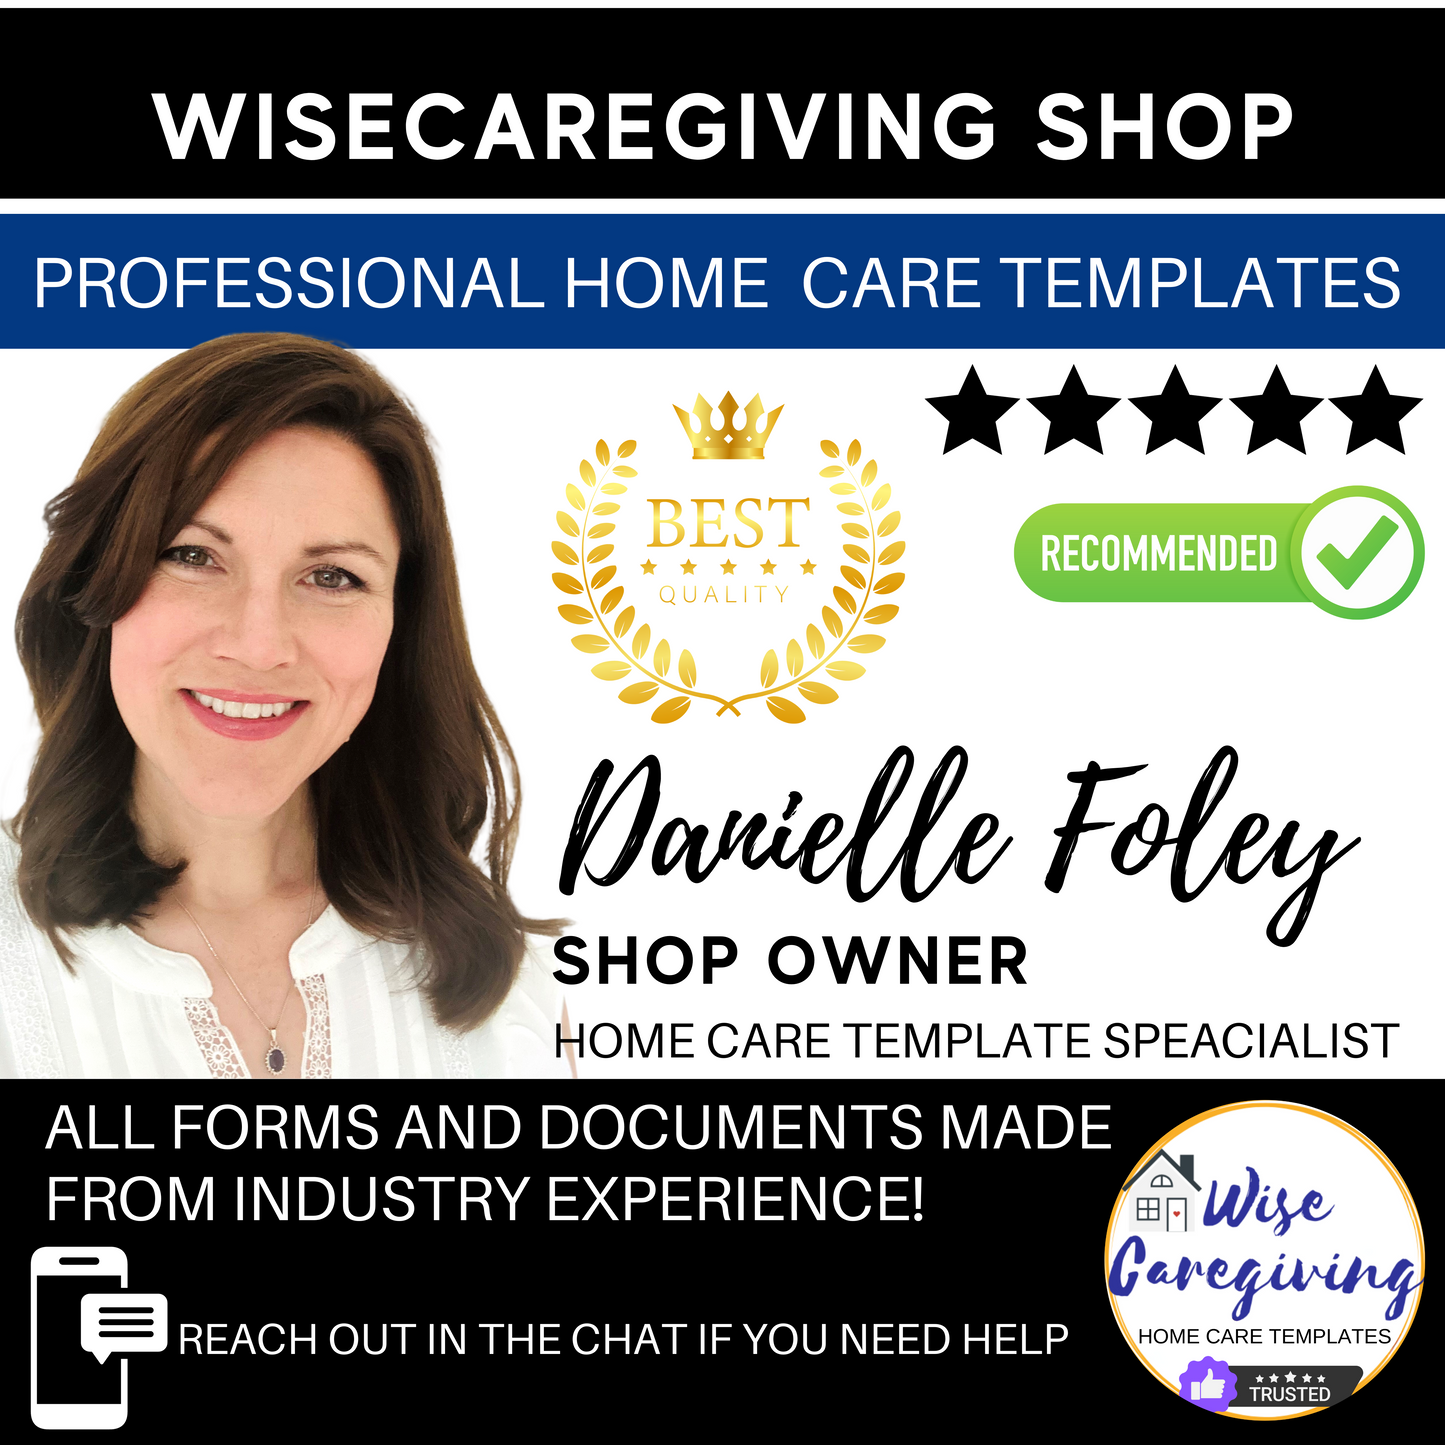 Home Care Housekeeping Checklist